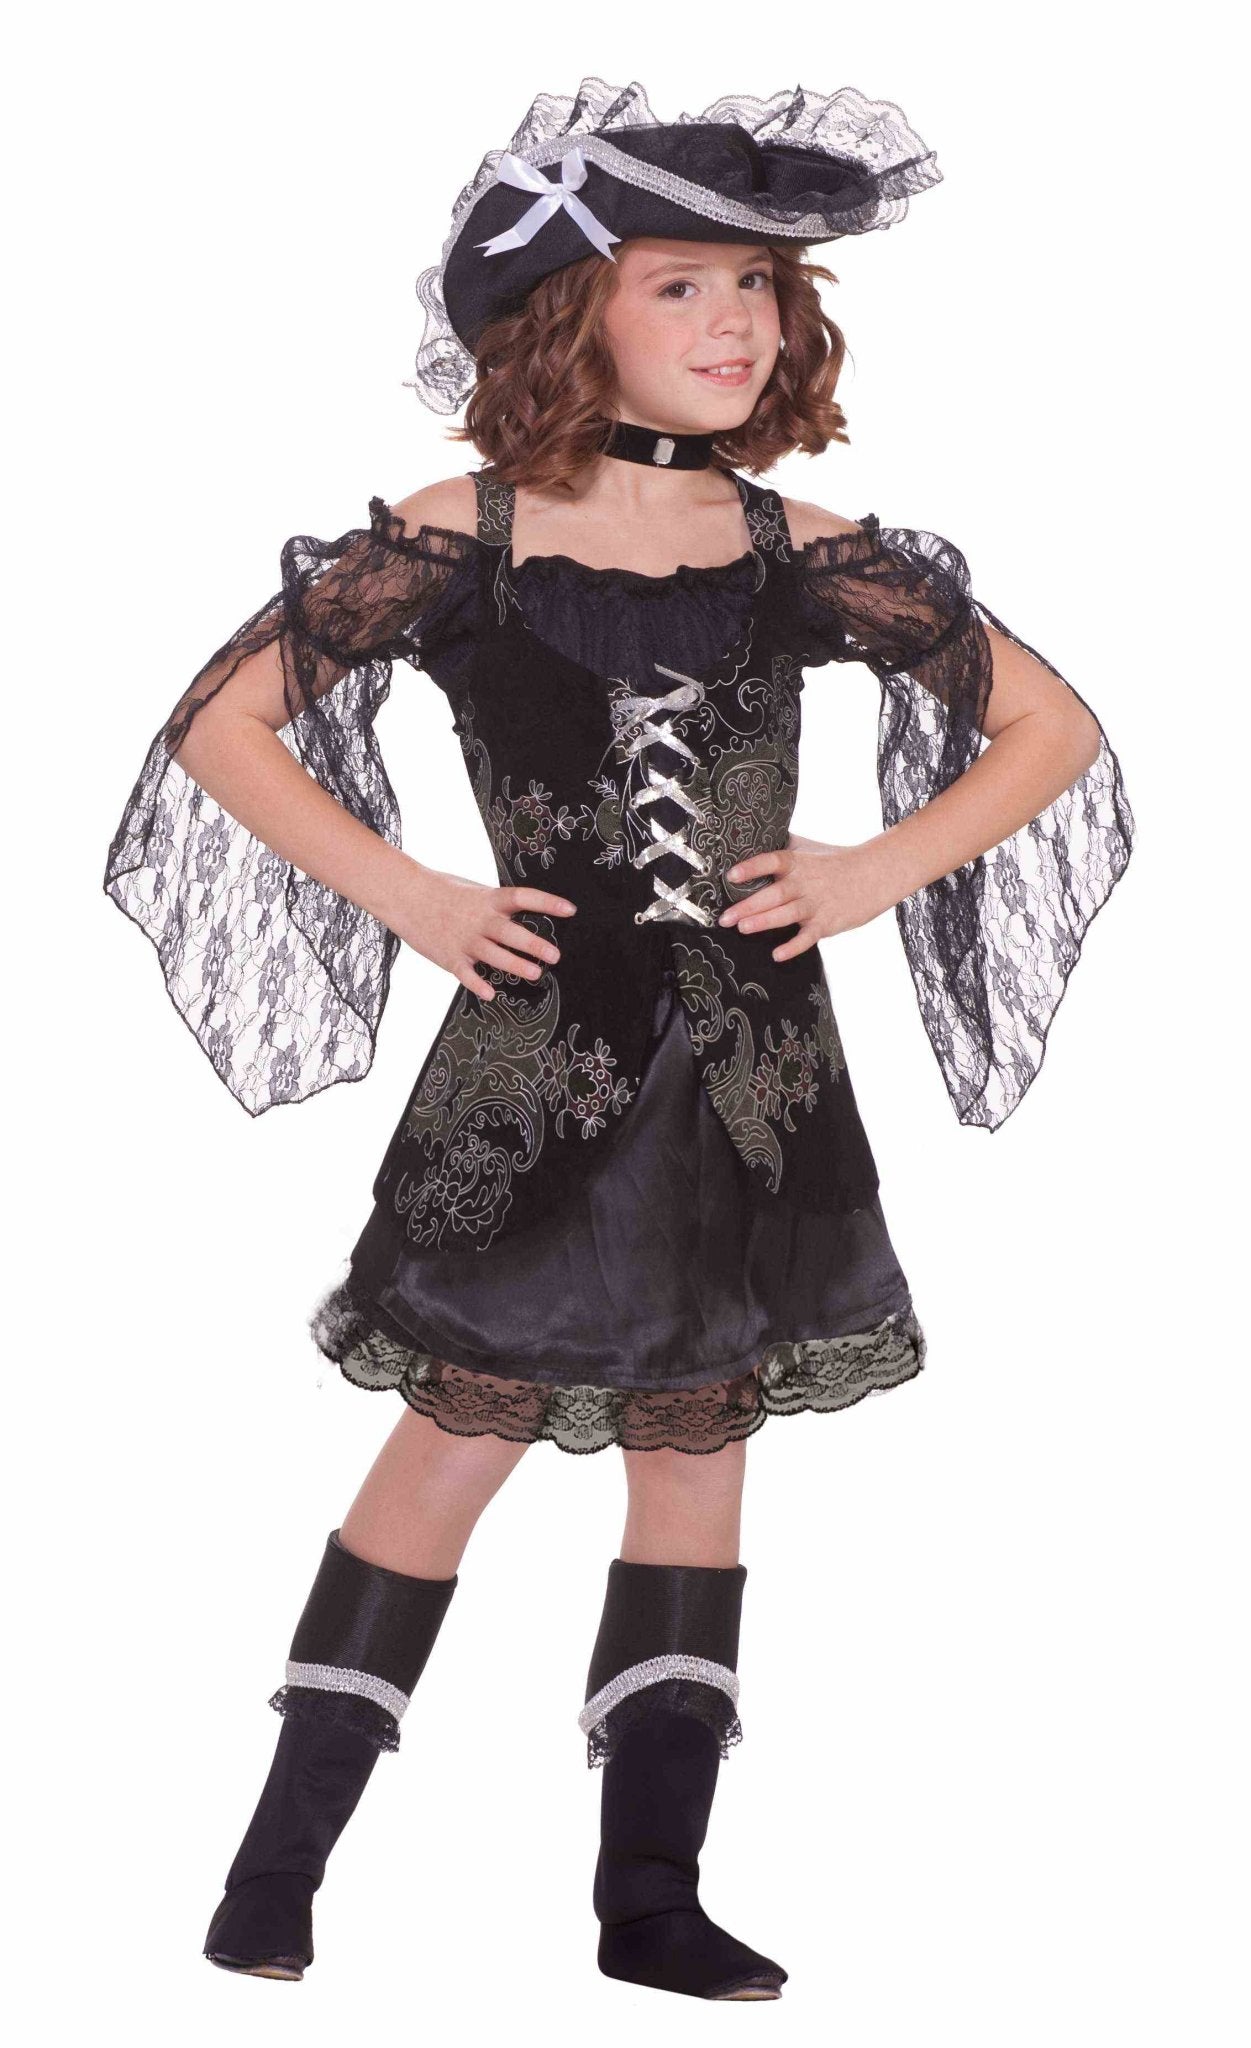 Girls Swash Buckler Sweetie Pirate Costume-Large - JJ's Party House